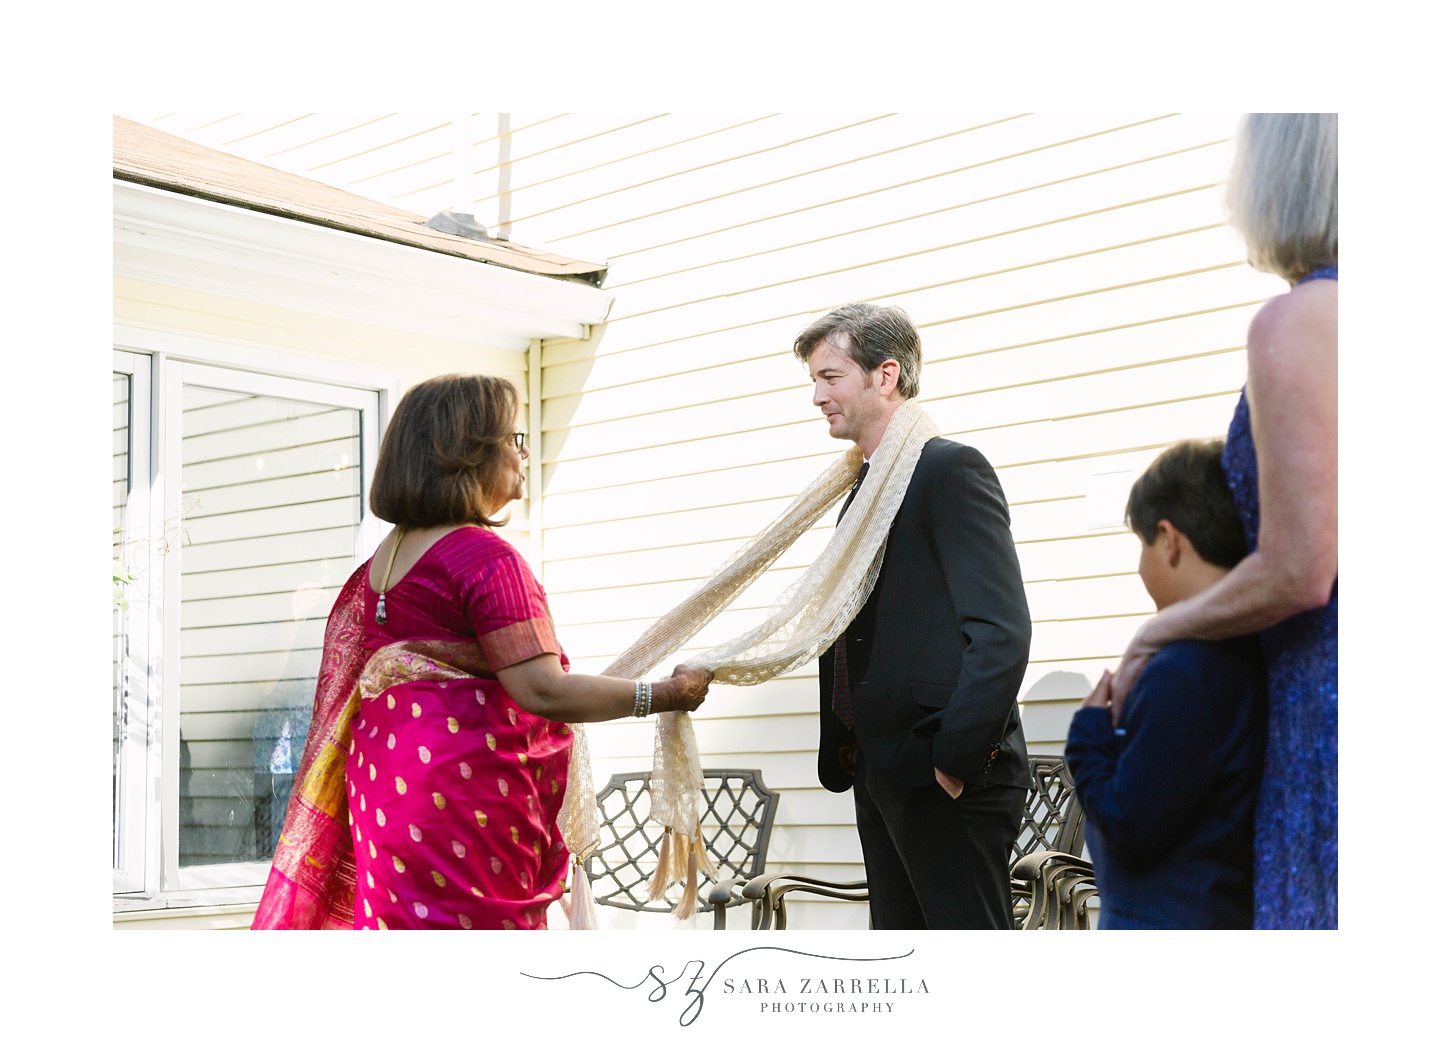 mother of the bride welcomes groom to home with traditional Hindu welcome